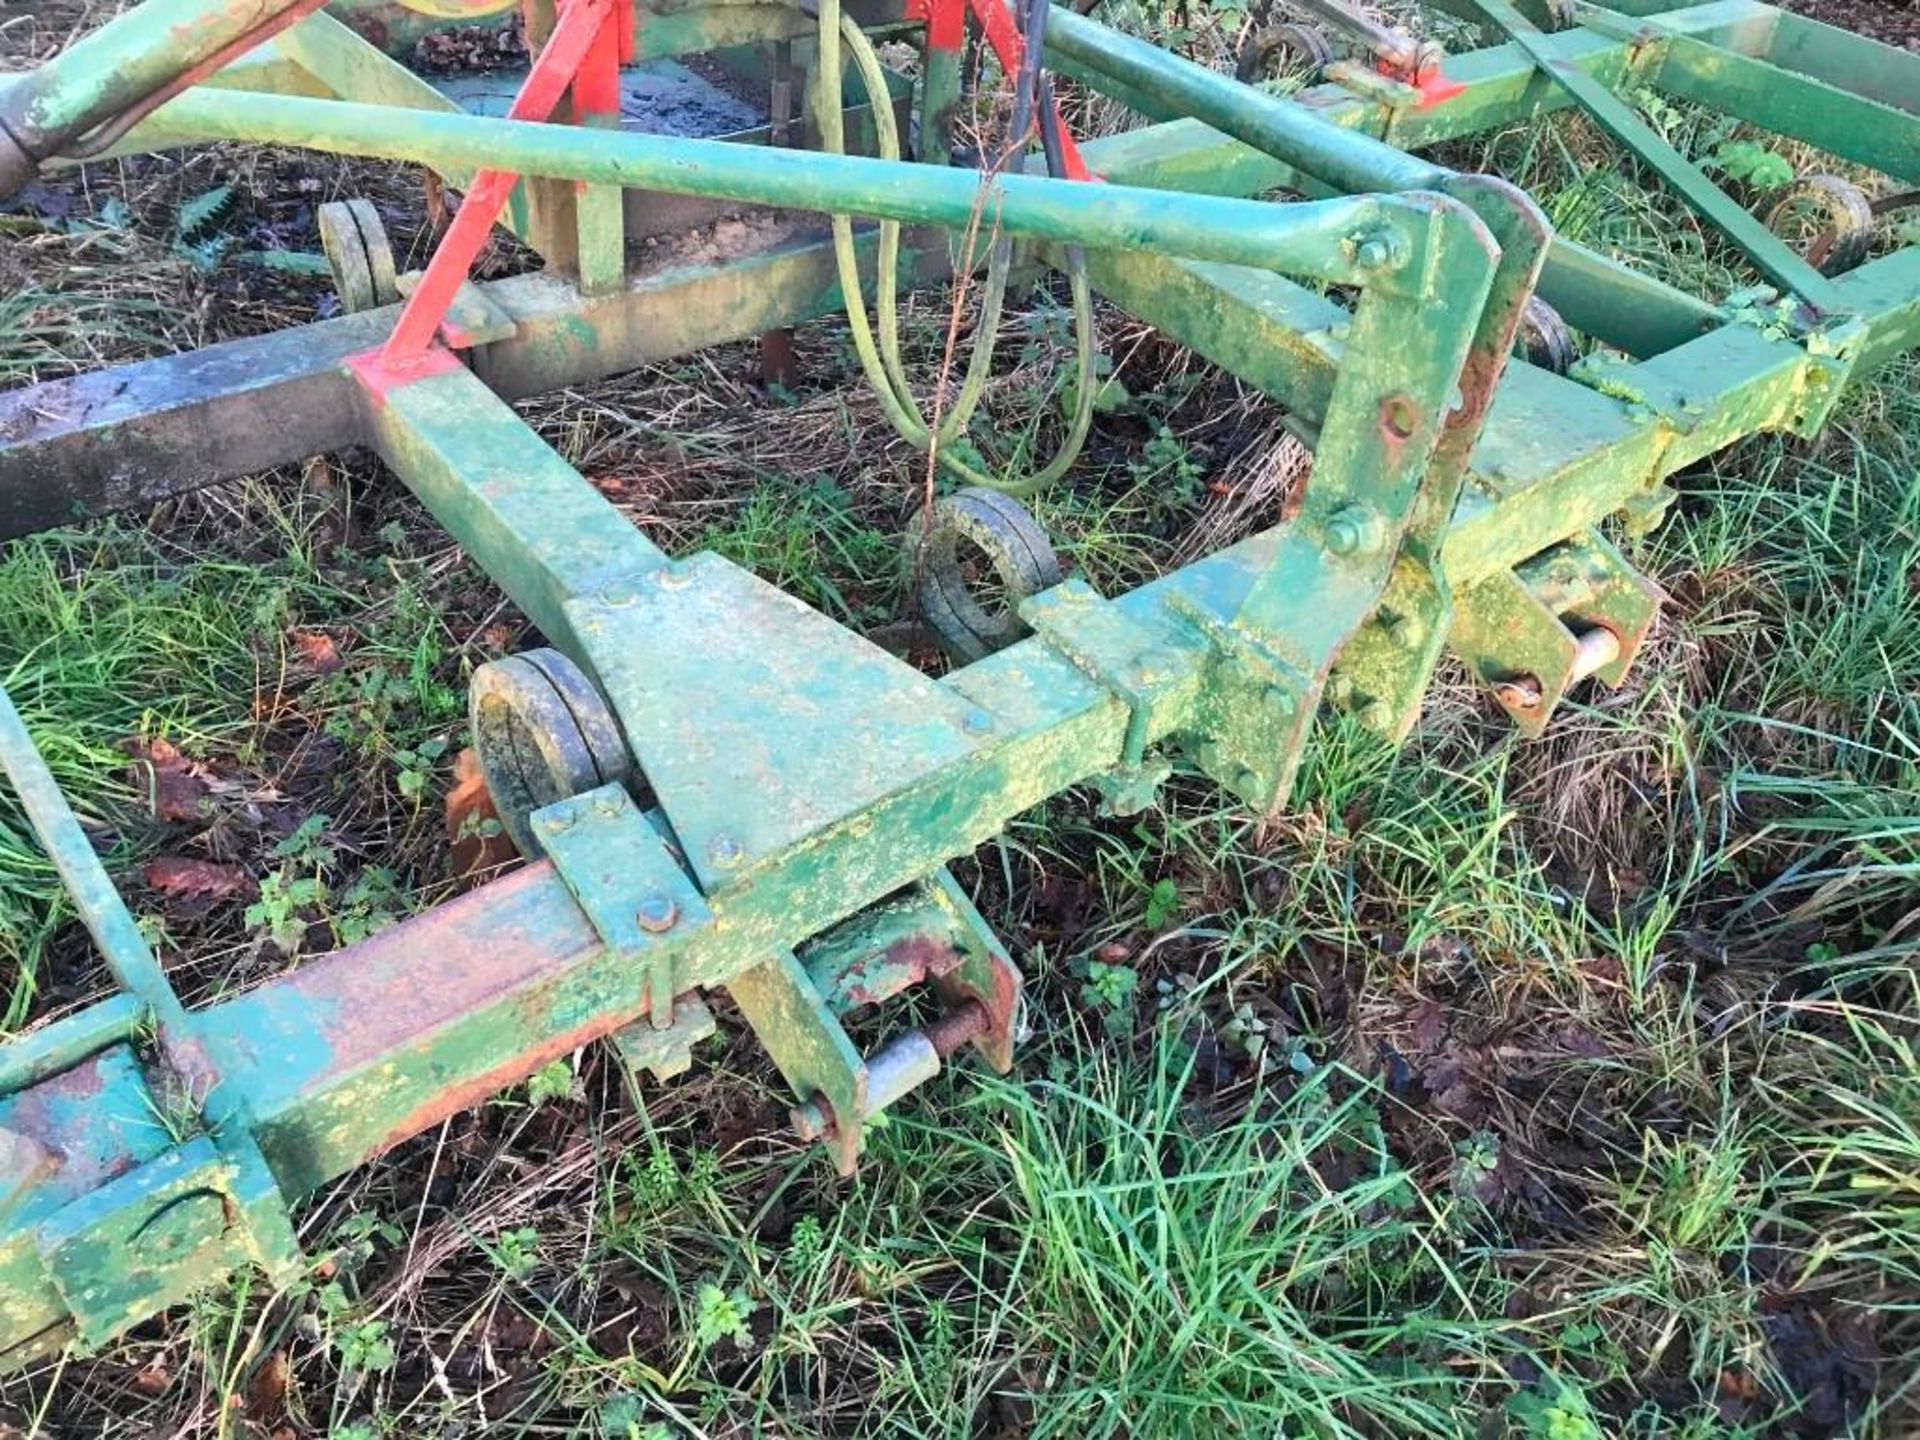 Heavy Duty 4.8m Spring Tine Cultivator - Image 6 of 9